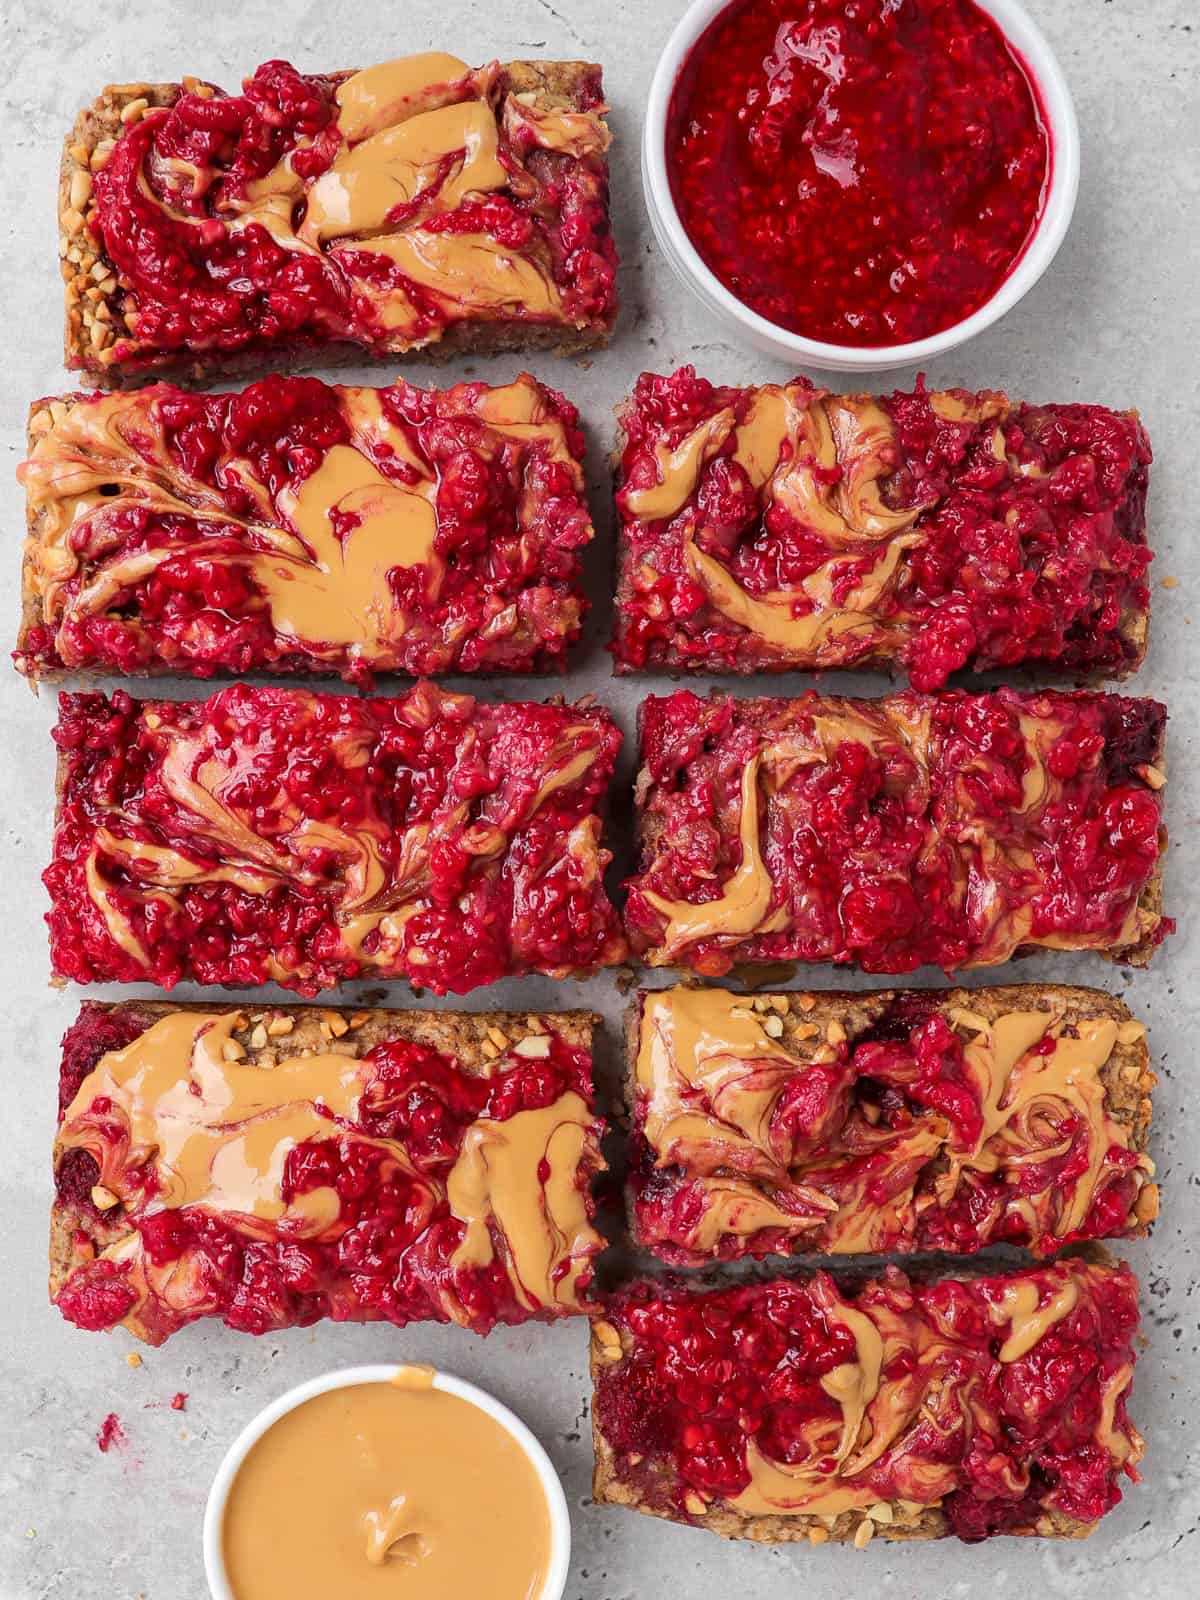 Peanut butter and jelly oatmeal cut up into bars. Small dish of peanut butter and mashed raspberries at top and bottom.